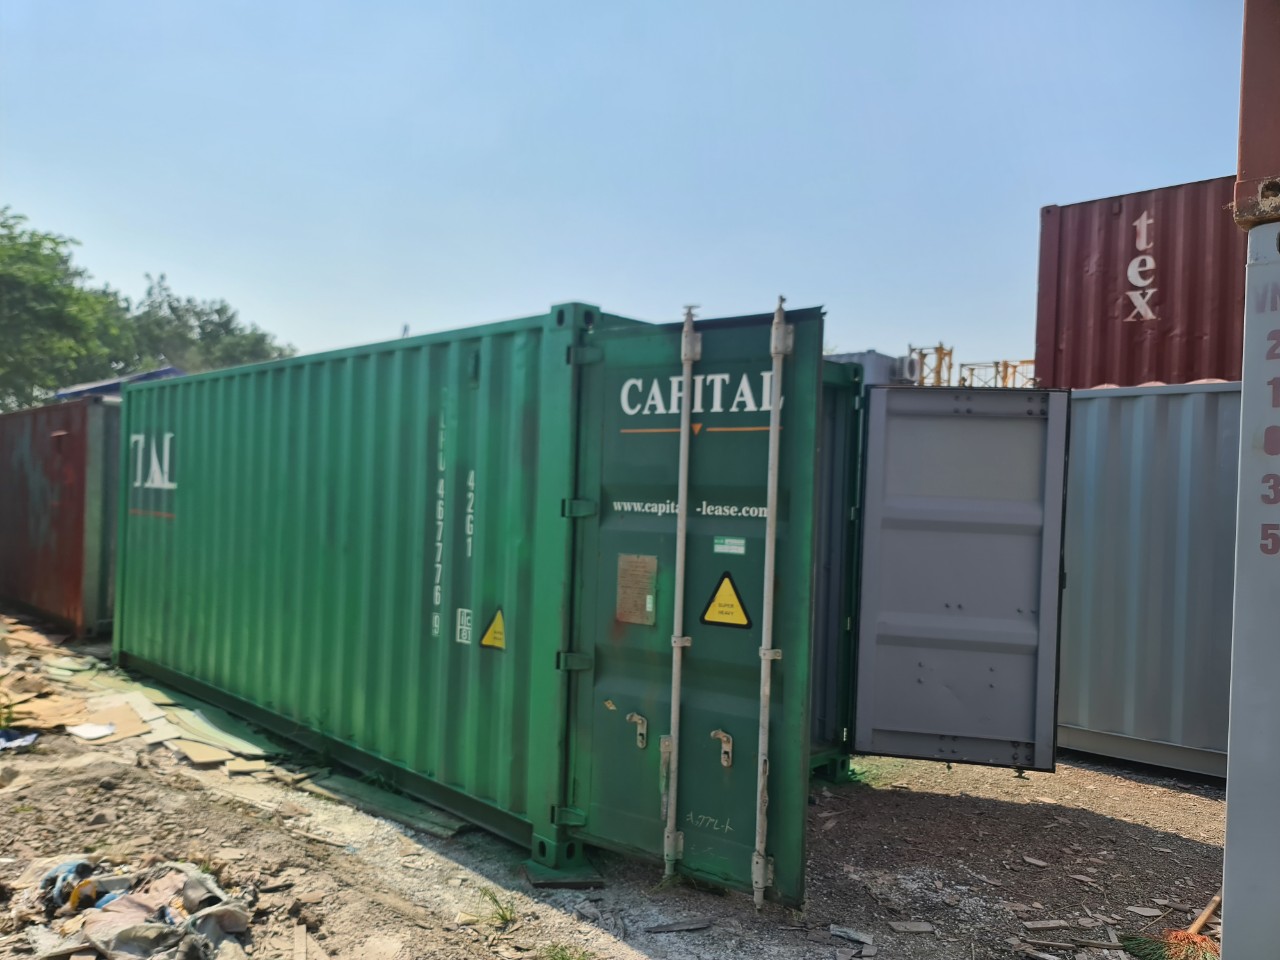 Container kho 20ft - Container Vinacon - Công Ty TNHH Tổng Hợp Vinacon Việt Nam